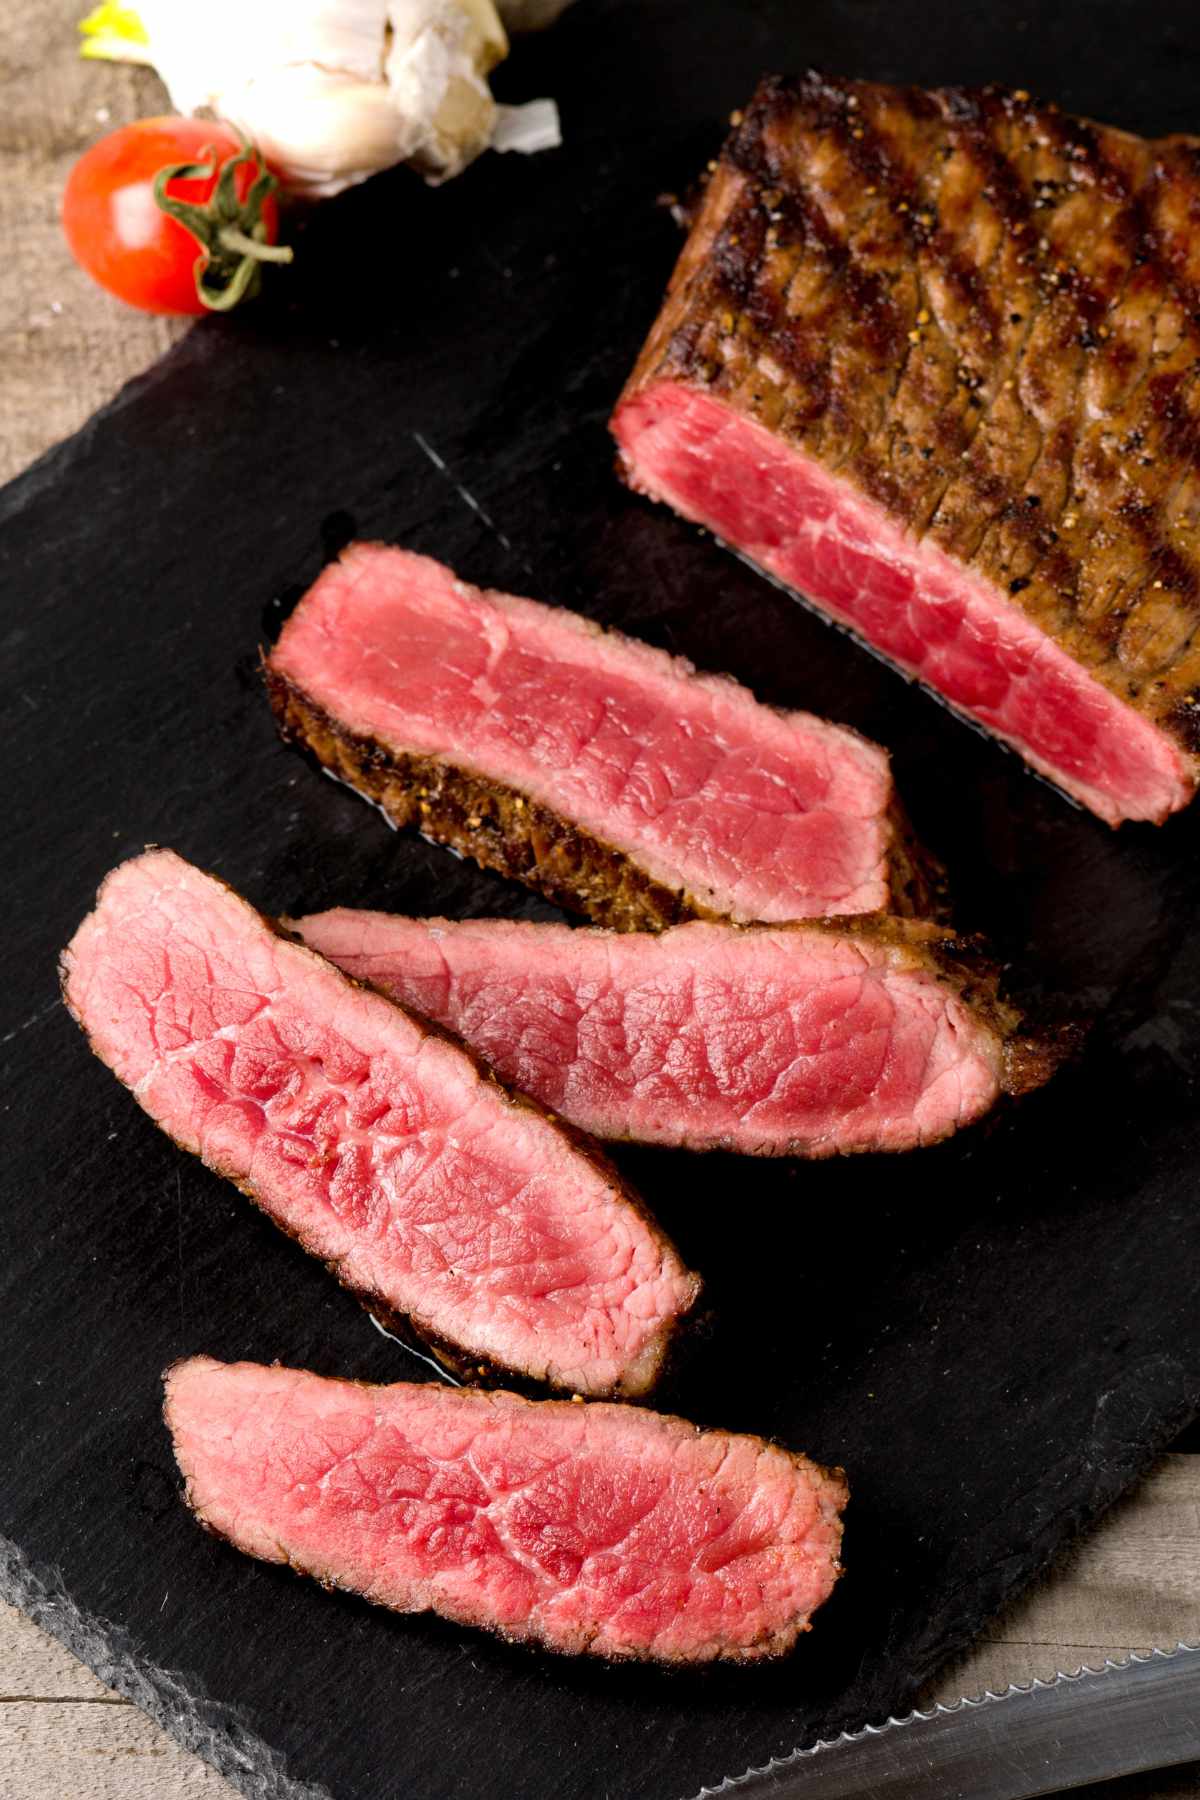 Wondering what a Rare Beef Temp should be? Find out how to measure rare beef temperature, whether you’re cooking a steak, roast or any other cut.